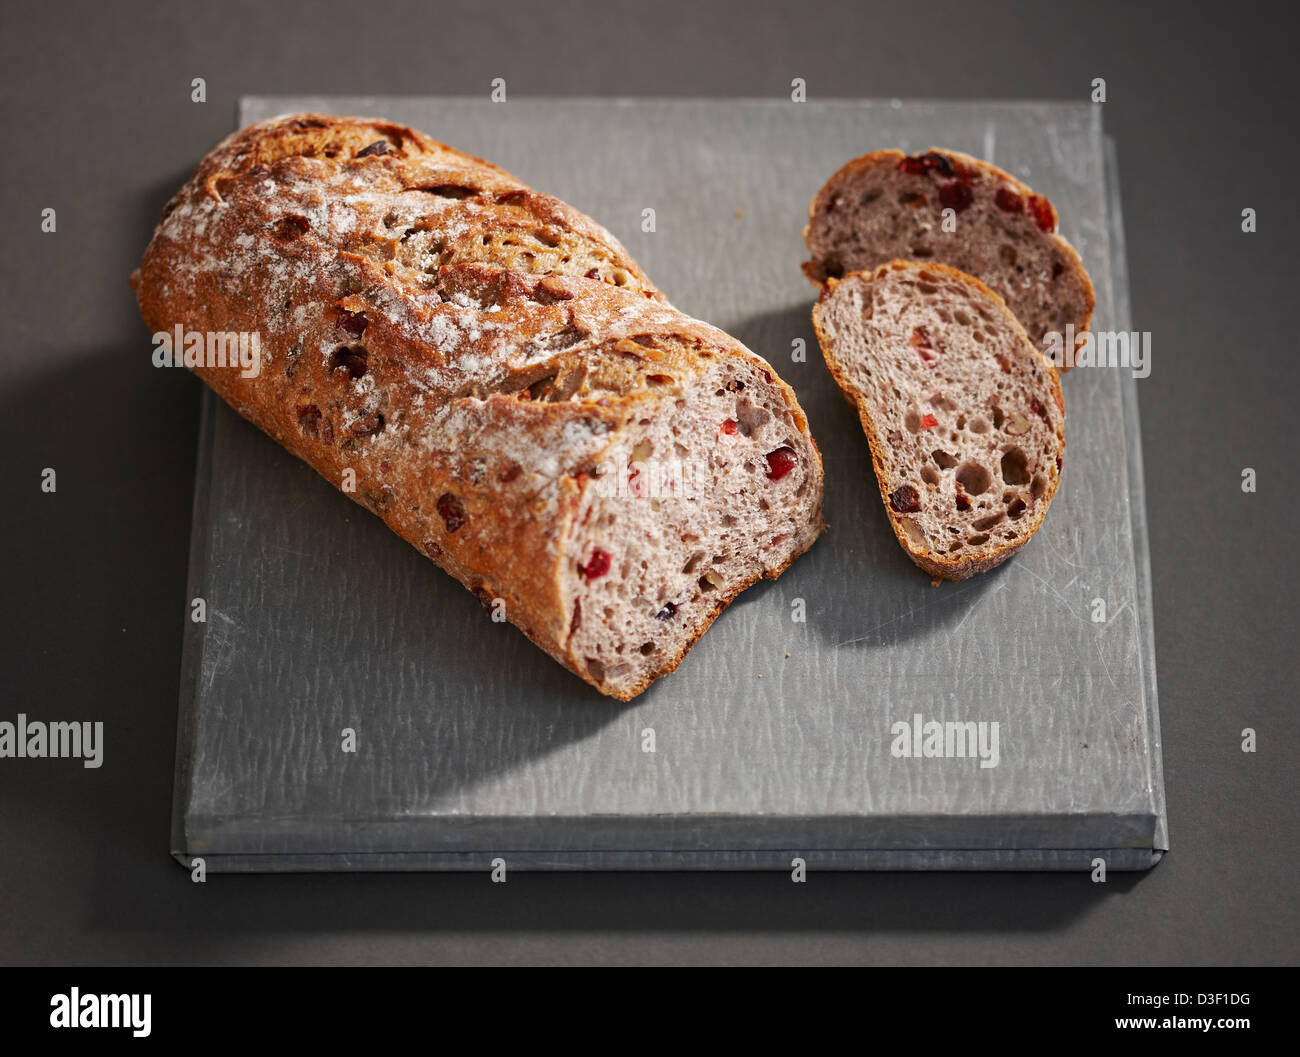 Cranberry toasted pecan fruit loaf Stock Photo